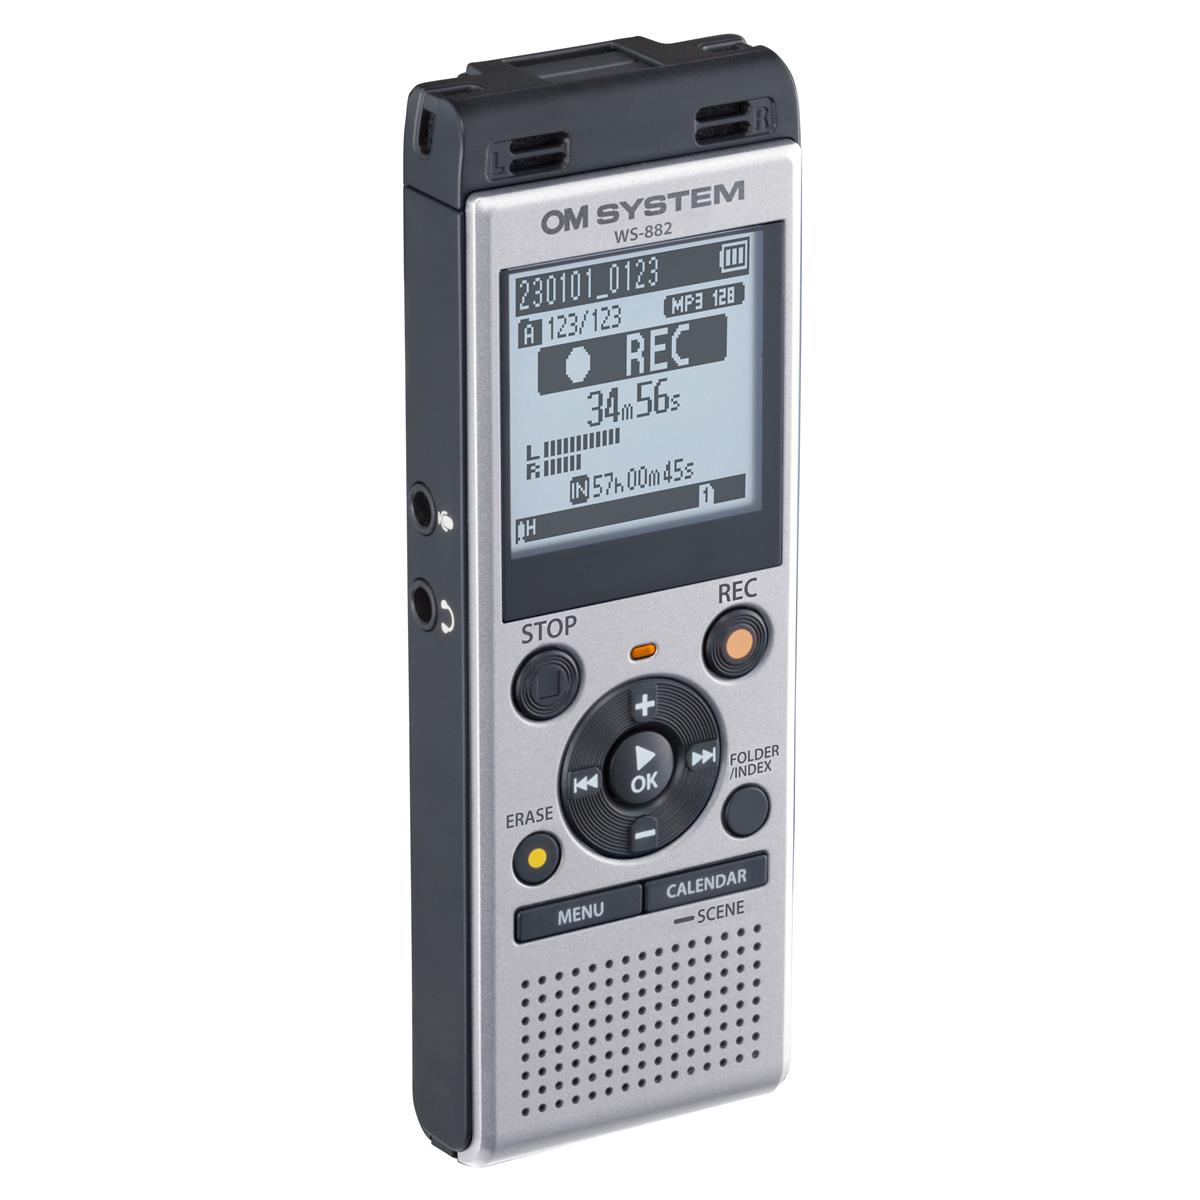 Image of OM SYSTEM WS-882 4GB Digital Stereo Voice Recorder